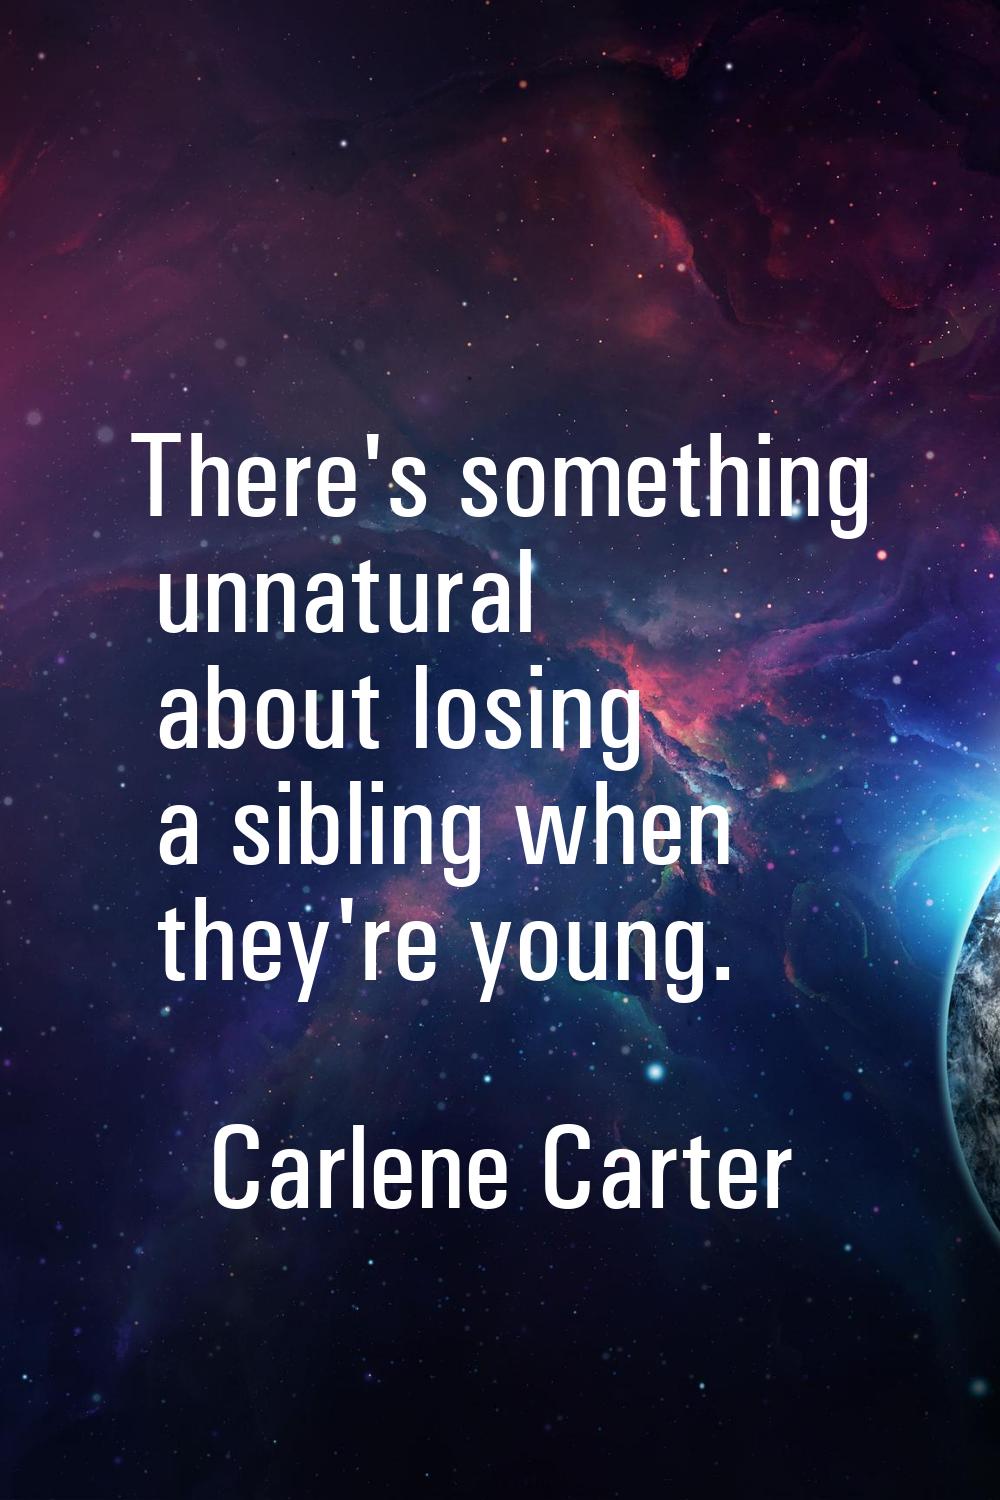 There's something unnatural about losing a sibling when they're young.